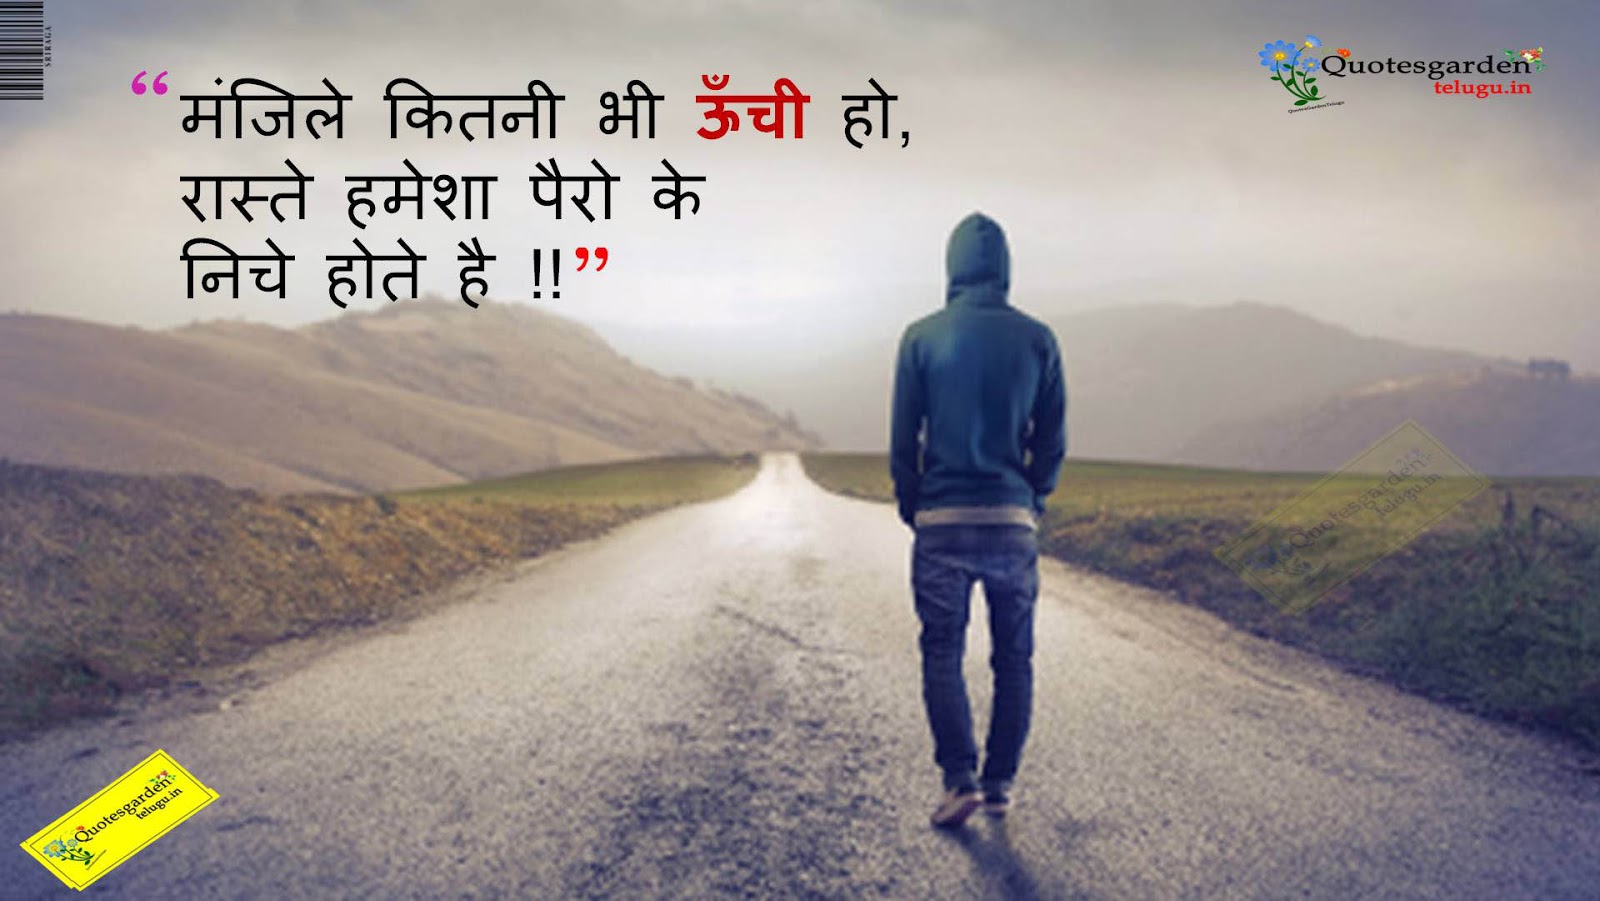 best-hindi-inspirational-quotes-anmol-vachan-suvichar-with-hd-images-698-quotes-garden-telugu